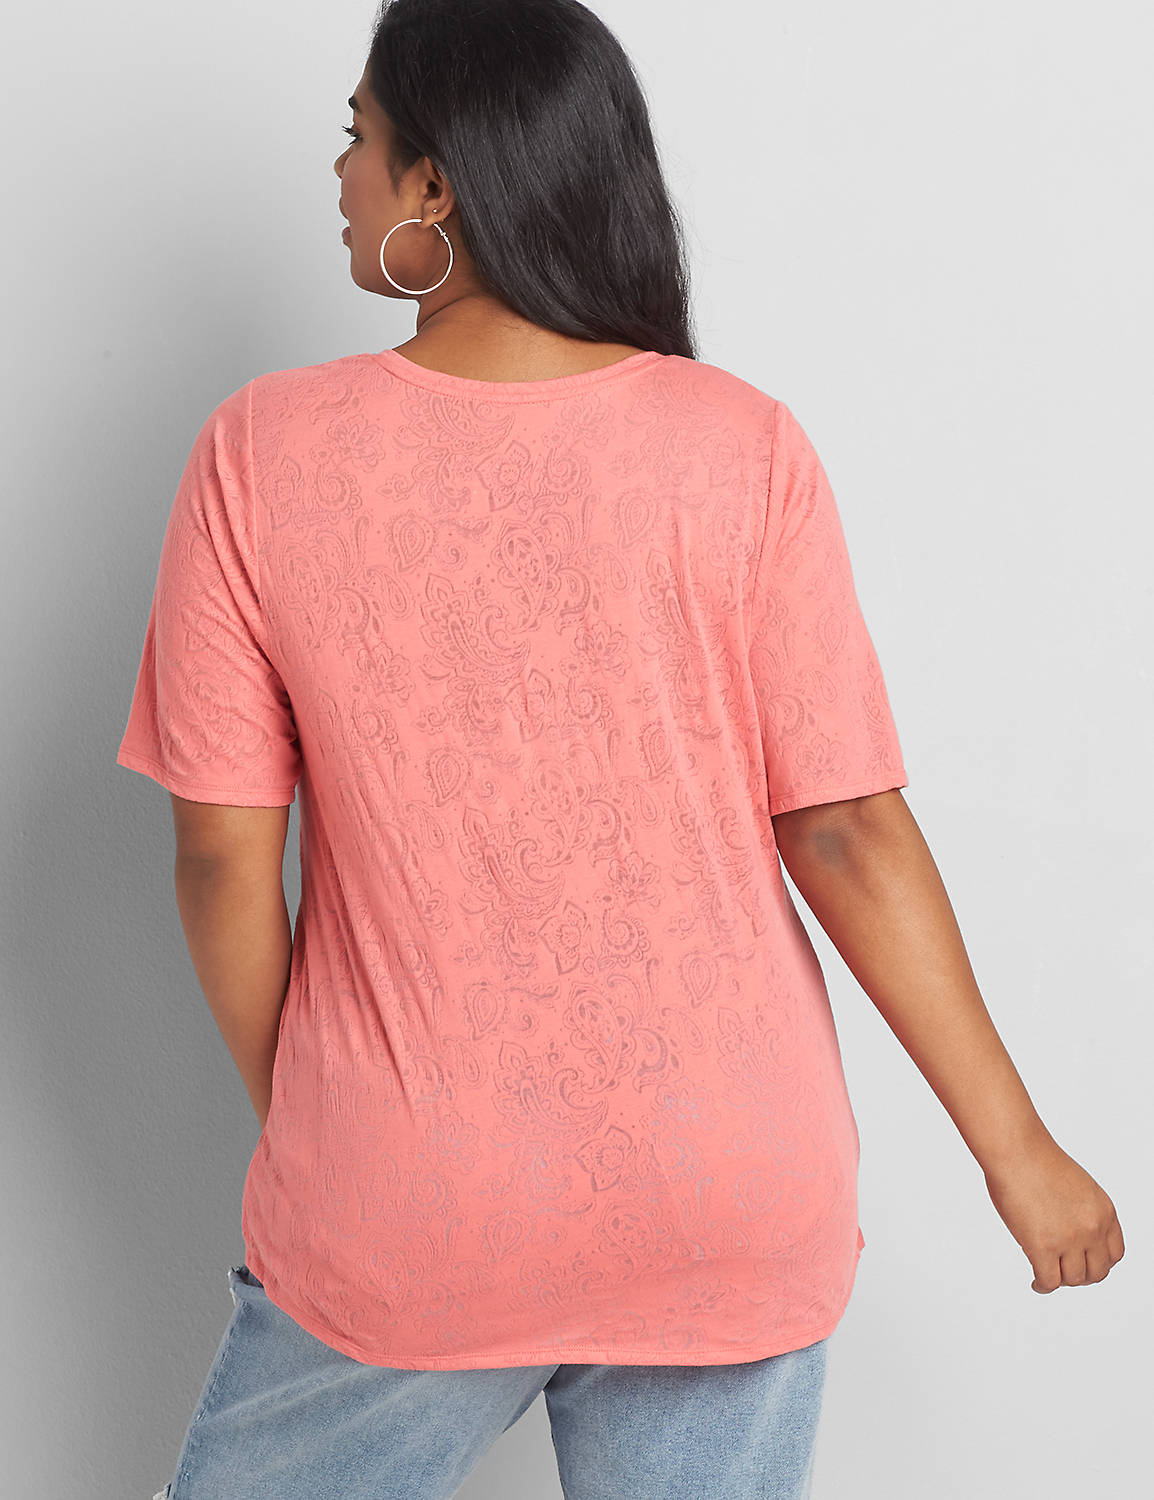 Perfect Sleeve V-Neck Burnout Tee Product Image 2